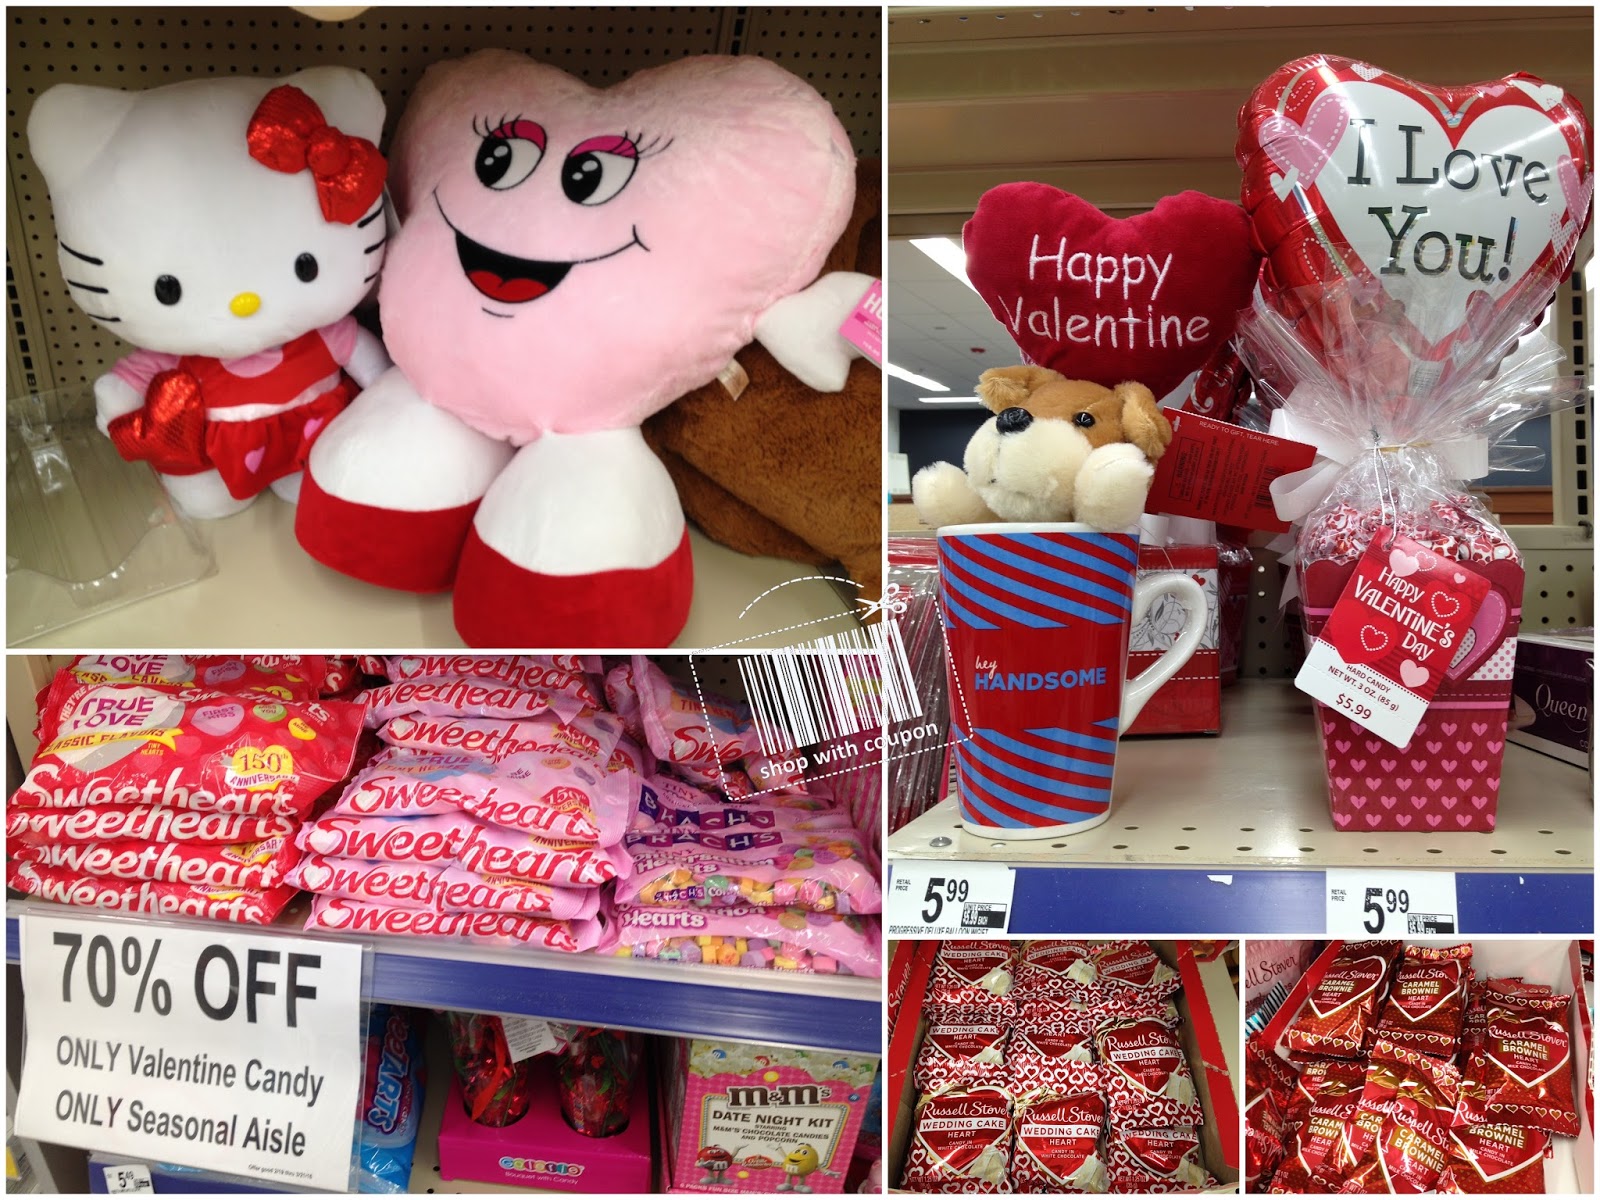 shop with coupon Walgreens Clearance Save 70 on Valentine Items!